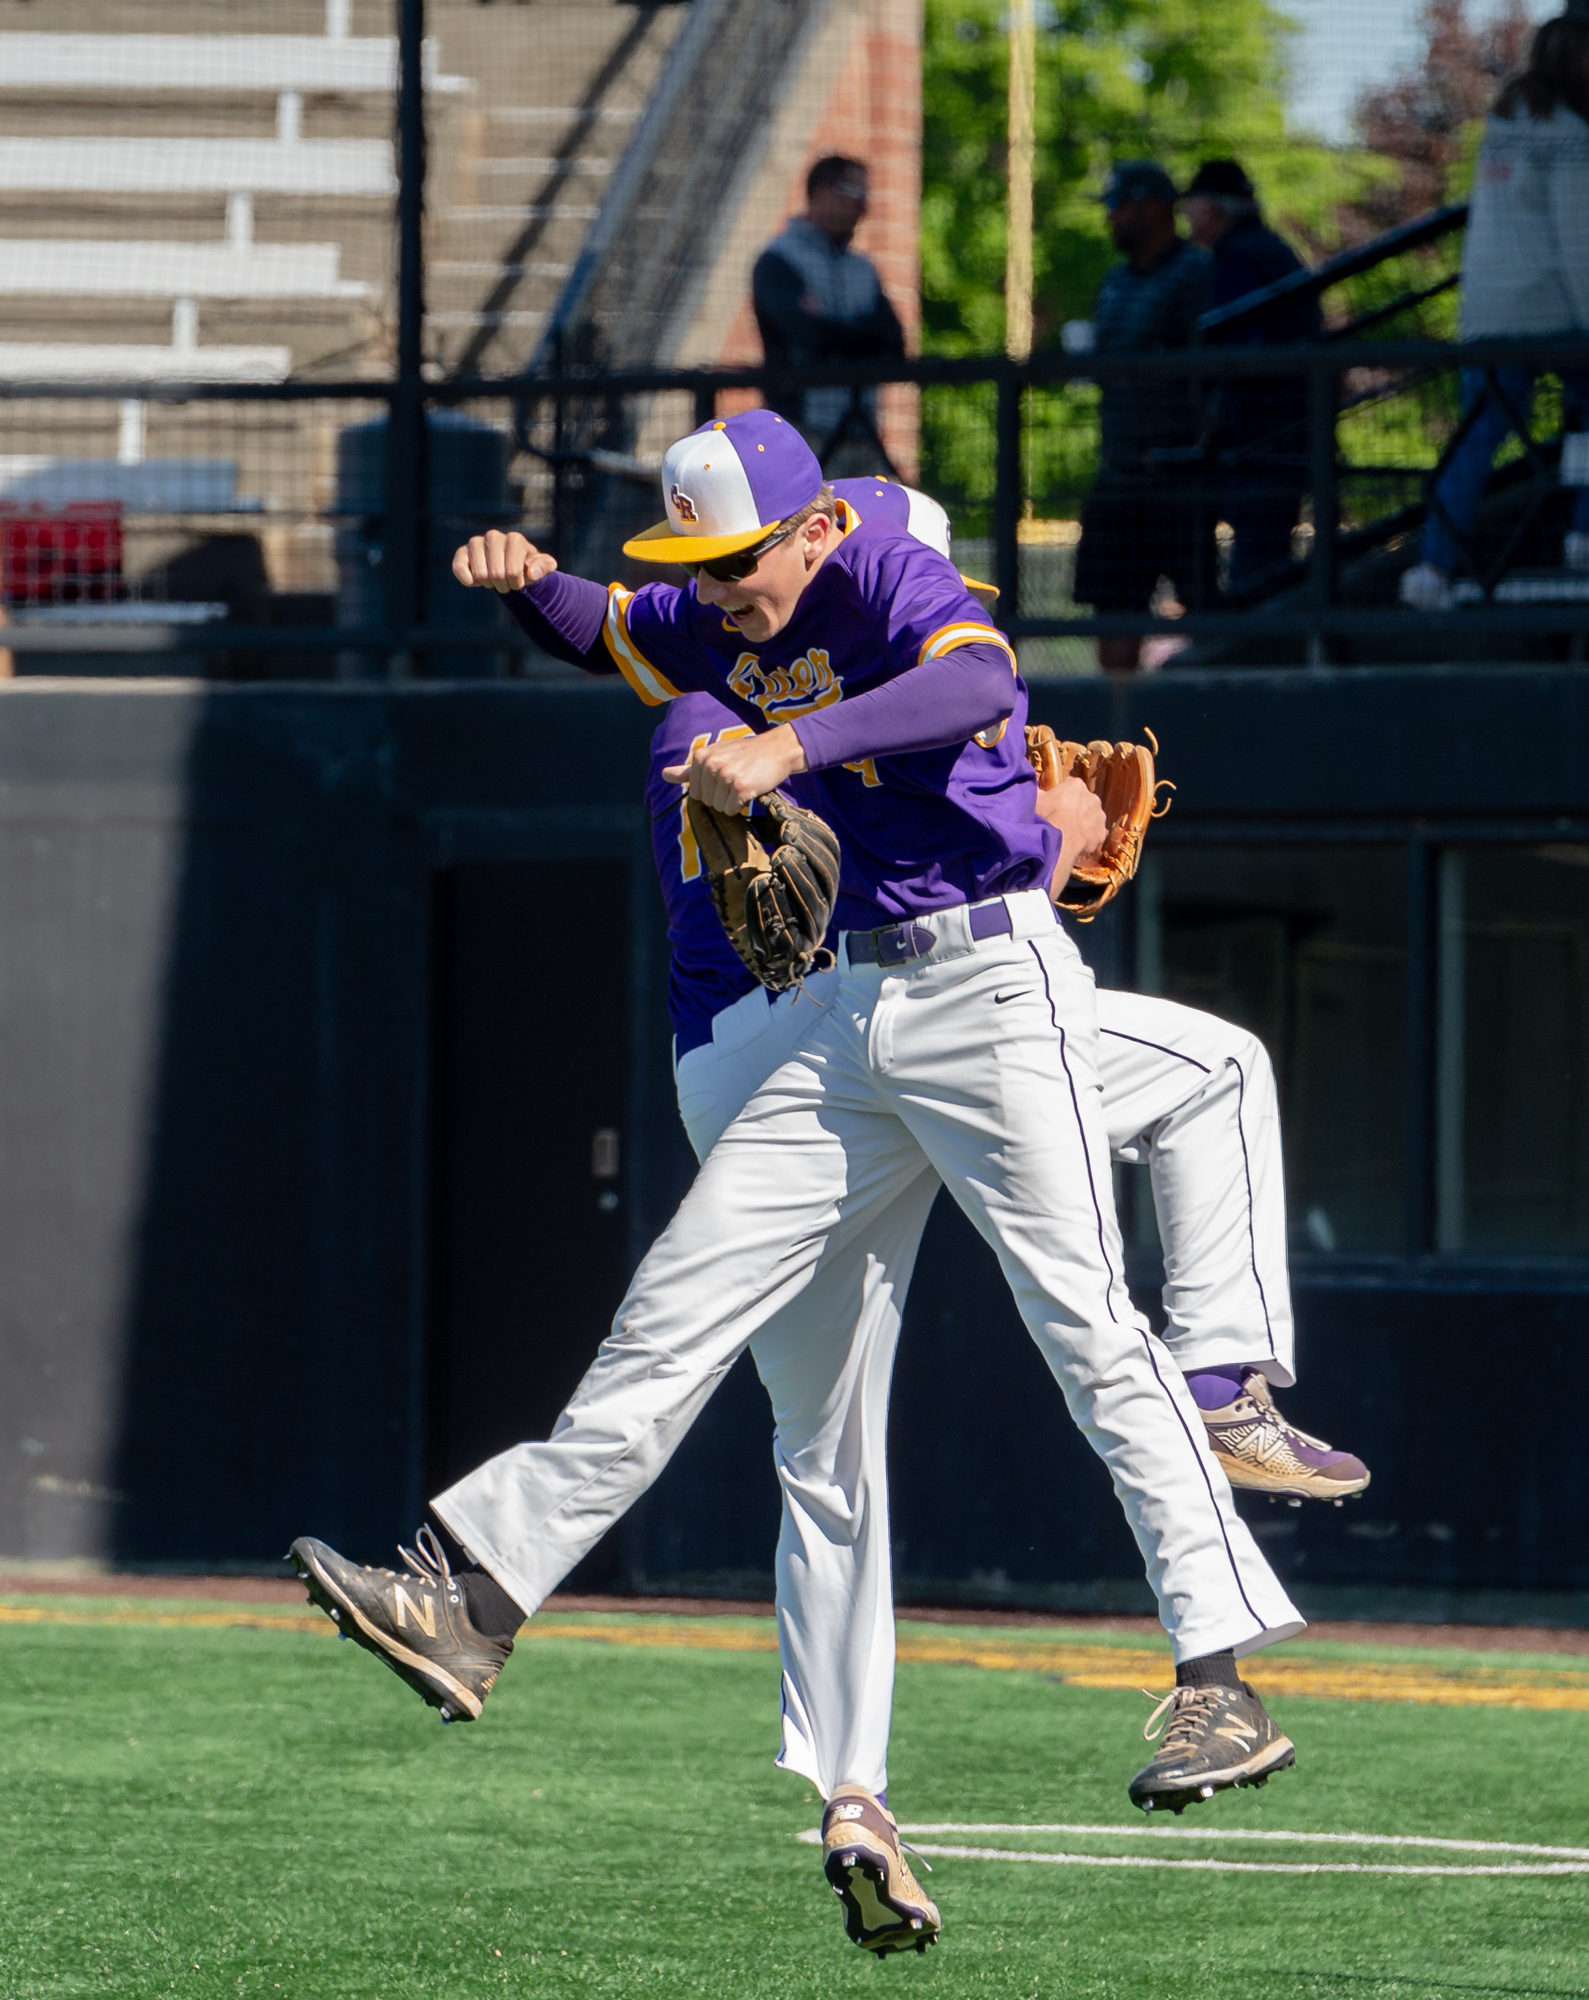 Columbia River's Casey Struckmeier and Peter Lubisich hip bump before a 2A State Baseball game on Saturday, May 21, 2022, at Propstra Stadium. Columbia River won 4-1.